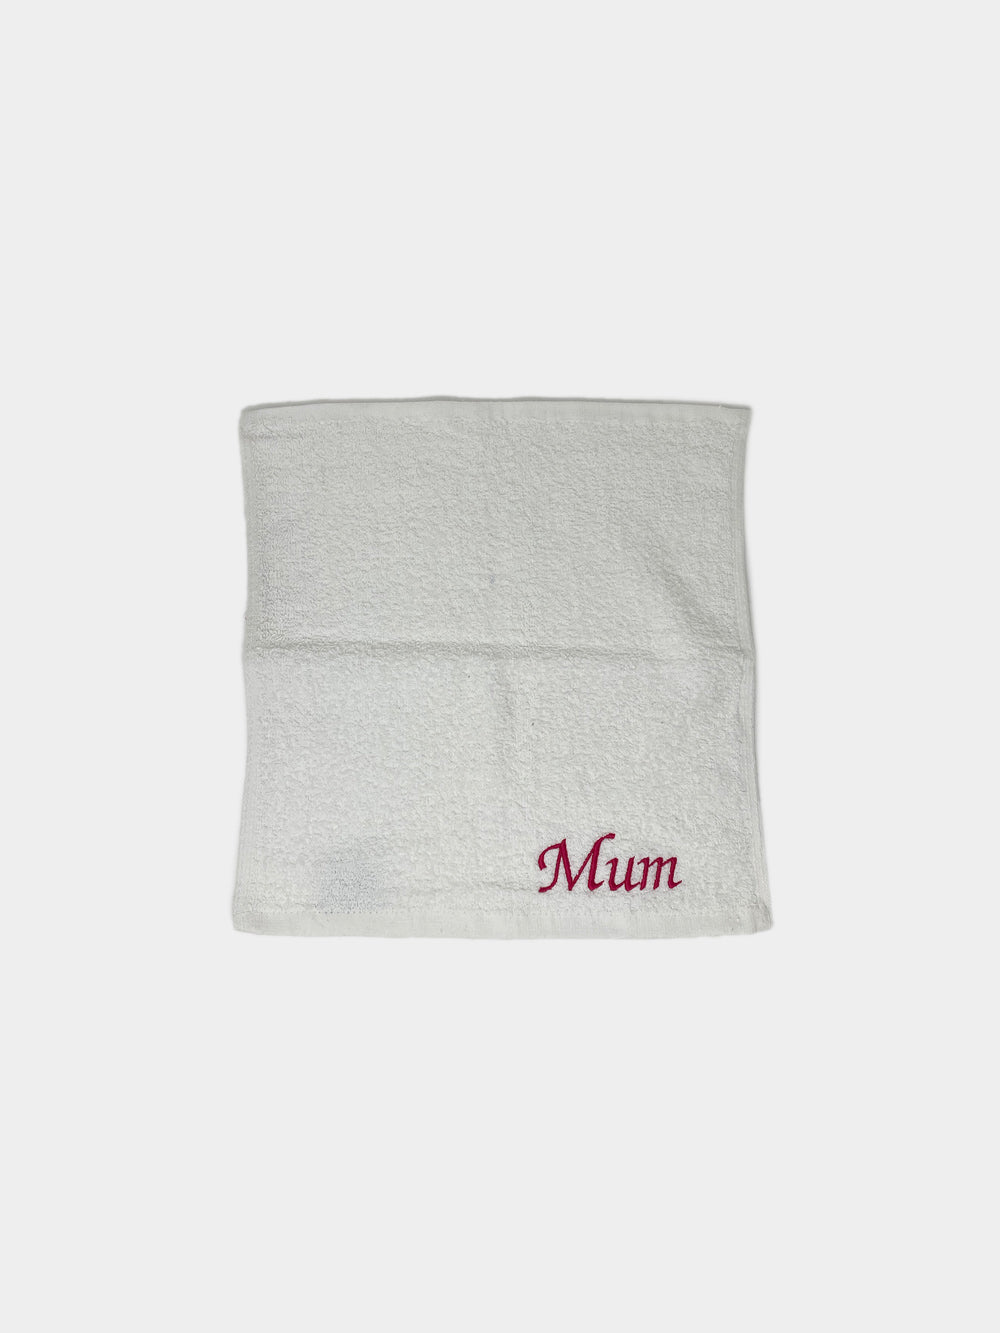 Personalised Face Cloth